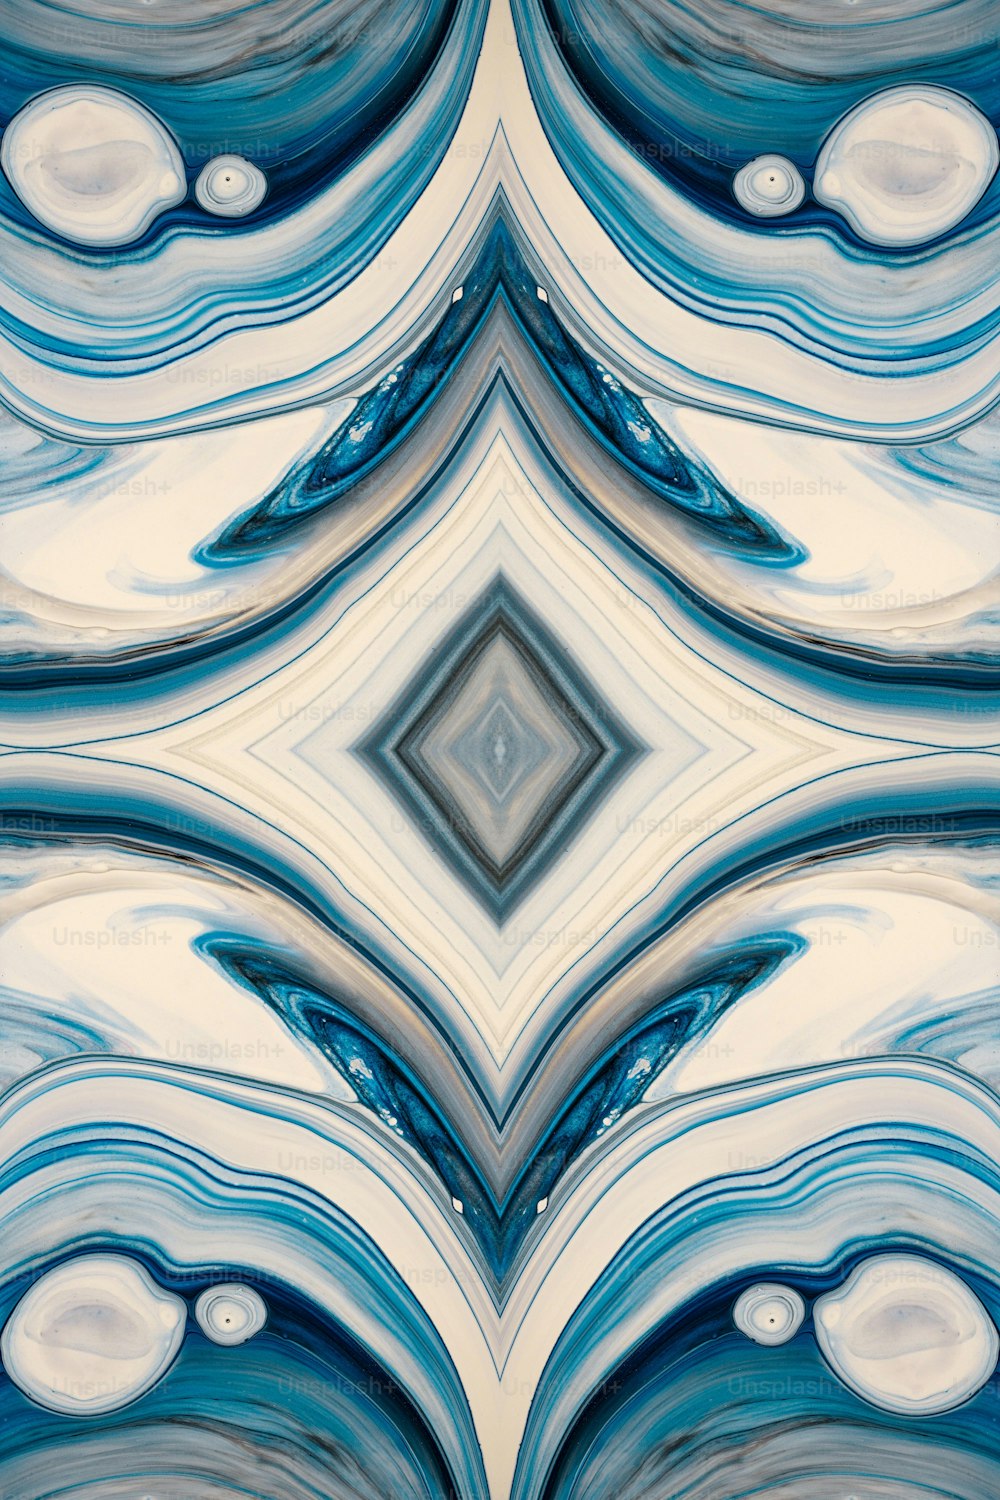 a blue and white abstract design with a diamond in the center